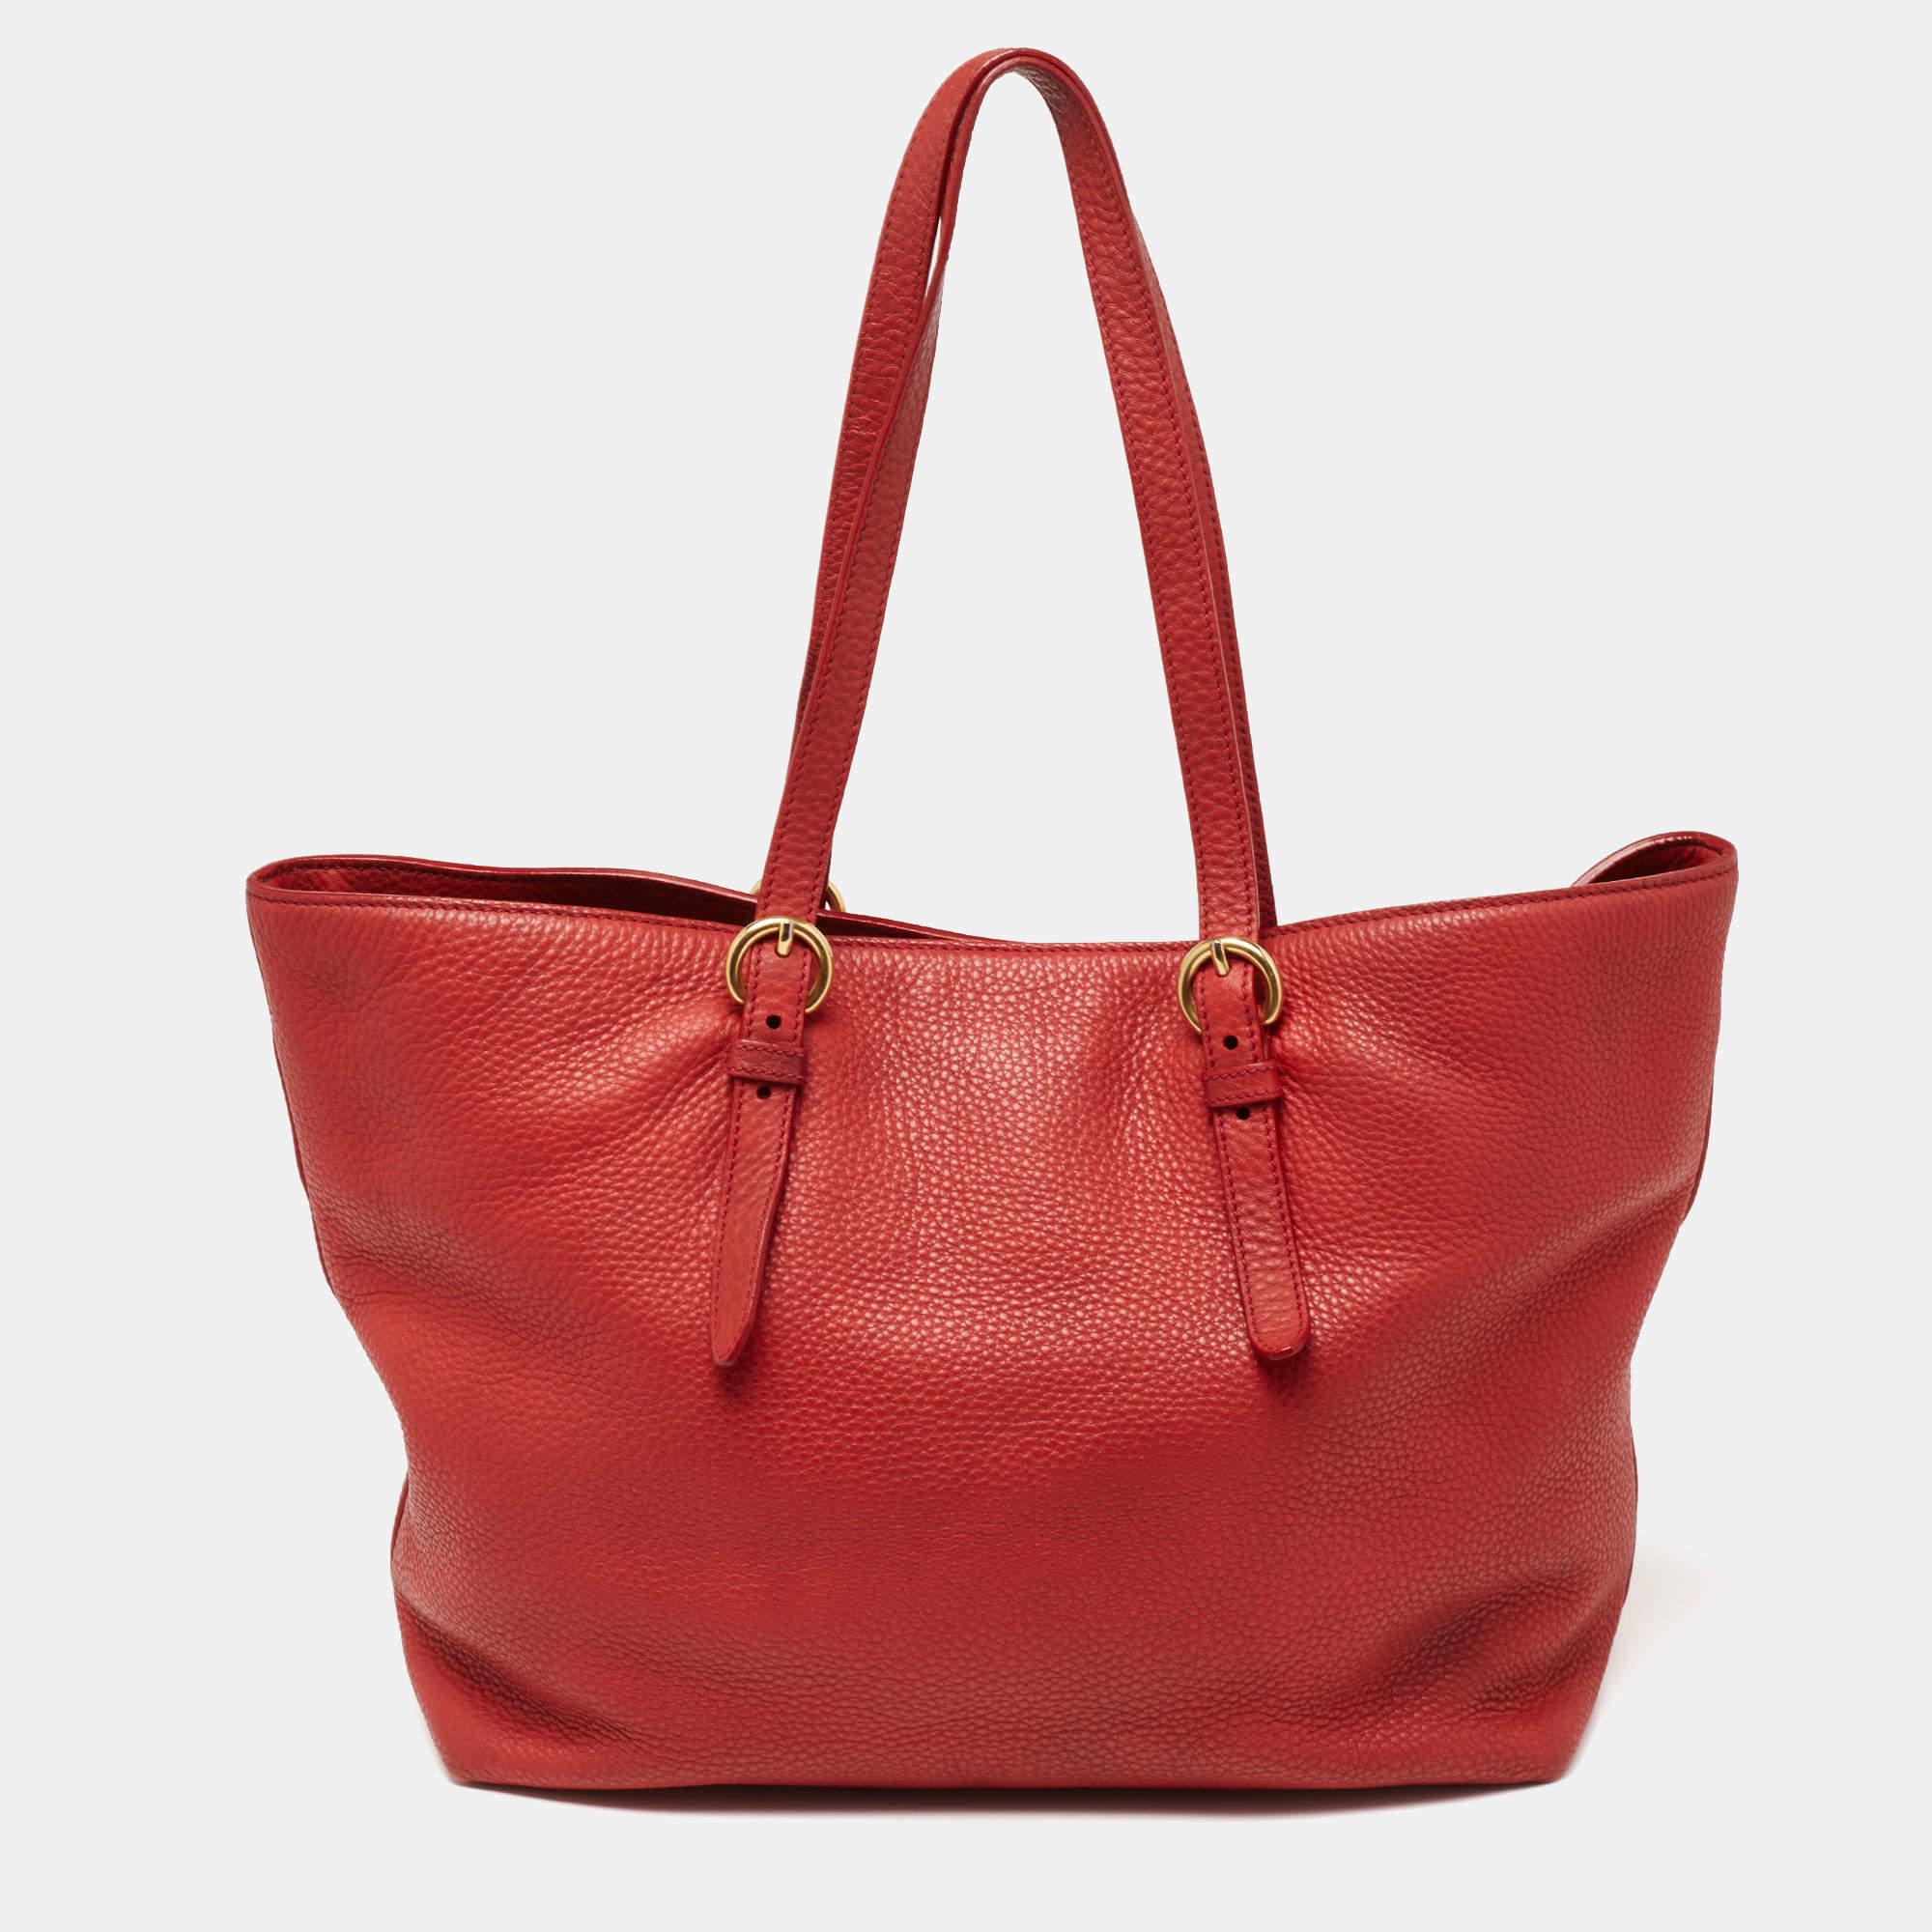 You don’t have to worry about things missing or falling with this shopper tote from Miu Miu. Made from red leather, this tote features two attached handles and a removable shoulder strap. The satin-lined interior is sized to carry your belongings